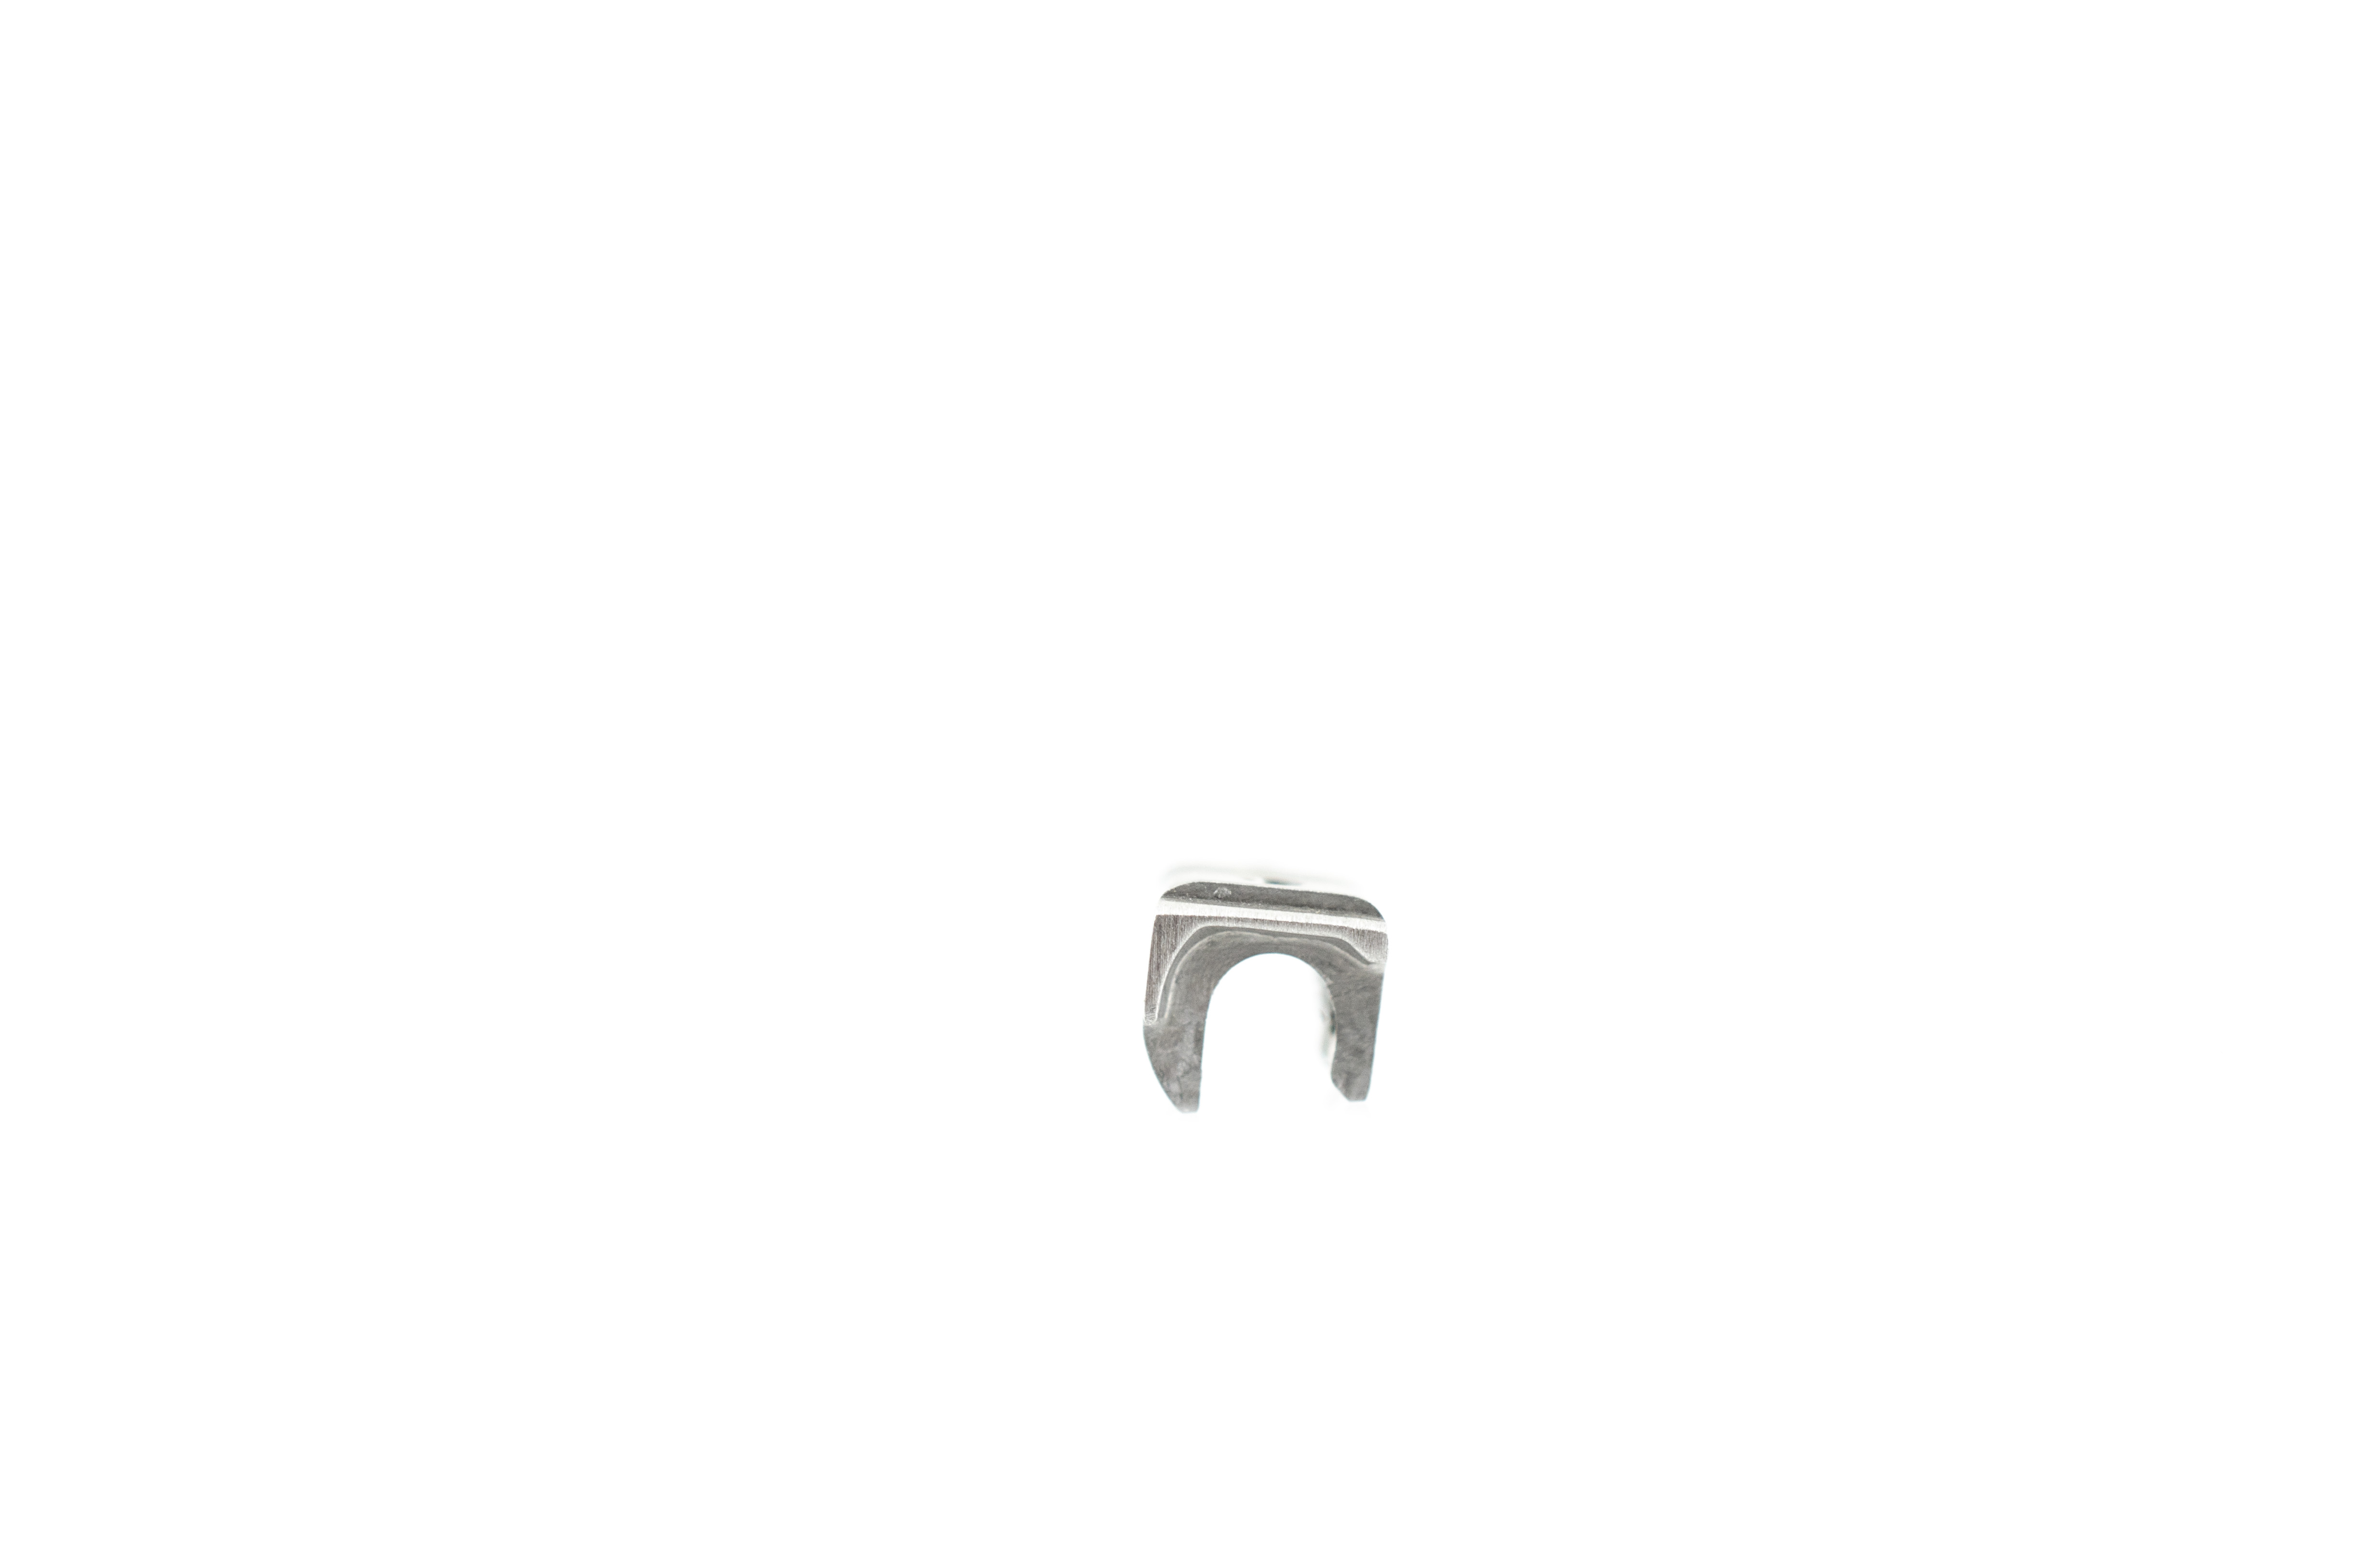 (OEM Compatible) Guide Plate Mount - 160, 180 Series